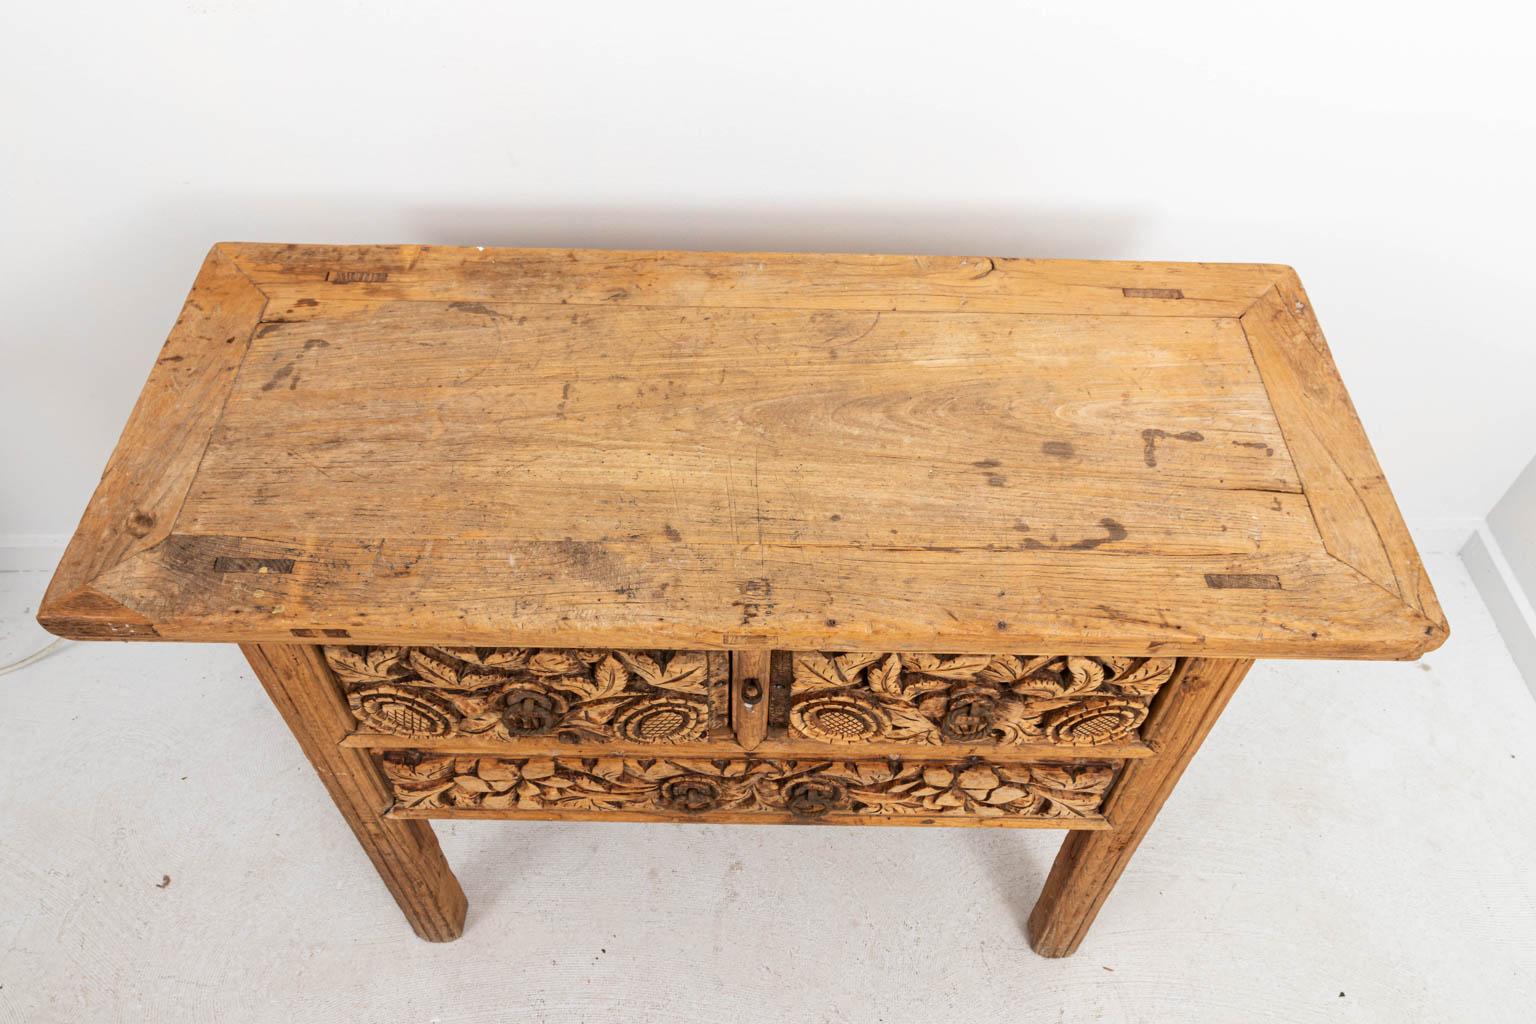 Chinese stripped wood console table with two carved drawers and square legs, circa 19th century. The piece also features heavy relief details of foliage on the drawer fronts and iron hardware. Please note of wear consistent with age including